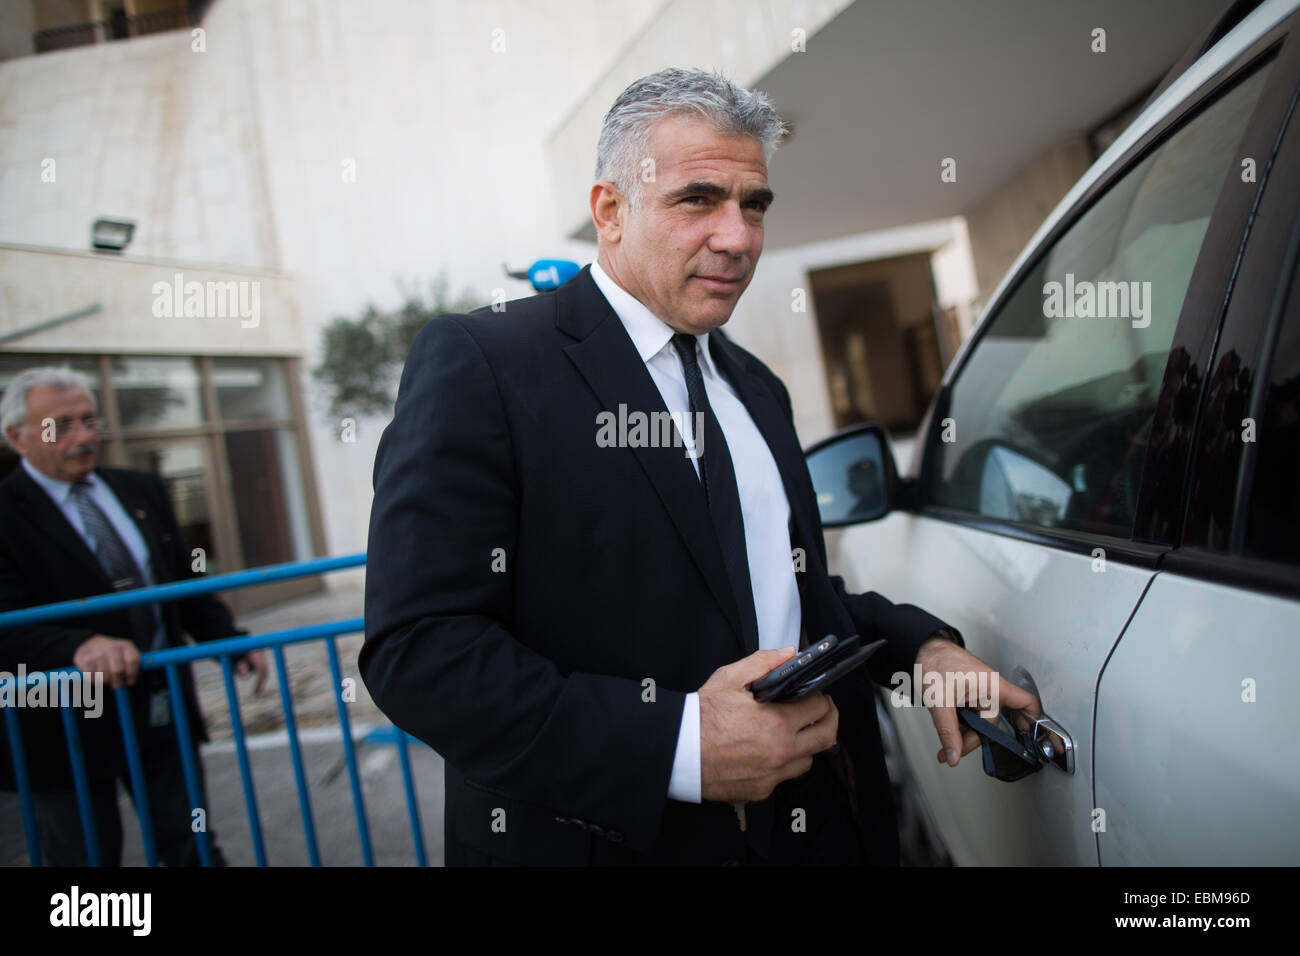 Jerusalem. 2nd Dec, 2014. Israeli Finance Minister Yair Lapid (front) leaves a financial conference in Jerusalem, on Dec. 2, 2014. Israeli Prime Minister Benjamin Netanyahu announced his support for dispersing the Knesset (parliament) and conducting early elections amid a coalition crisis. During a press conference at his Jerusalem office, Netanyahu also said he has ordered to fire Justice Minister Tzipi Livni and Finance Minister Yair Lapid, who he said plotted against him by outspokenly criticizing his policies. Credit:  JINI/Xinhua/Alamy Live News Stock Photo